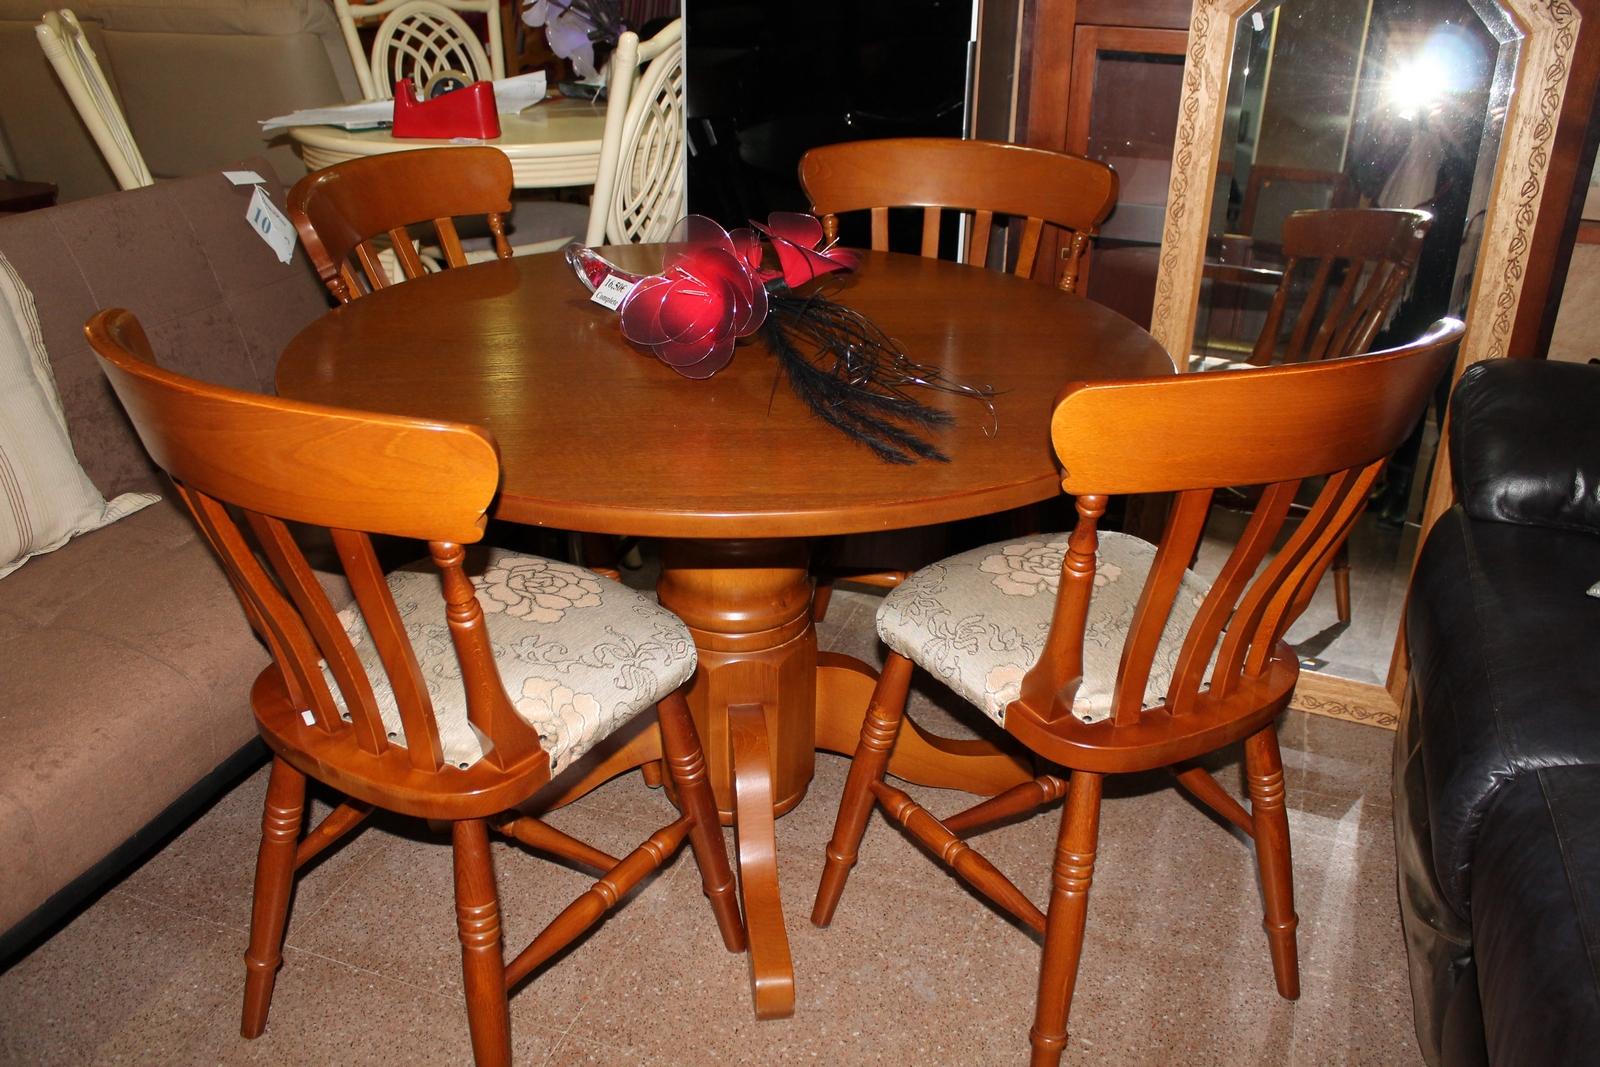 Second Hand Dining Room Table Sets